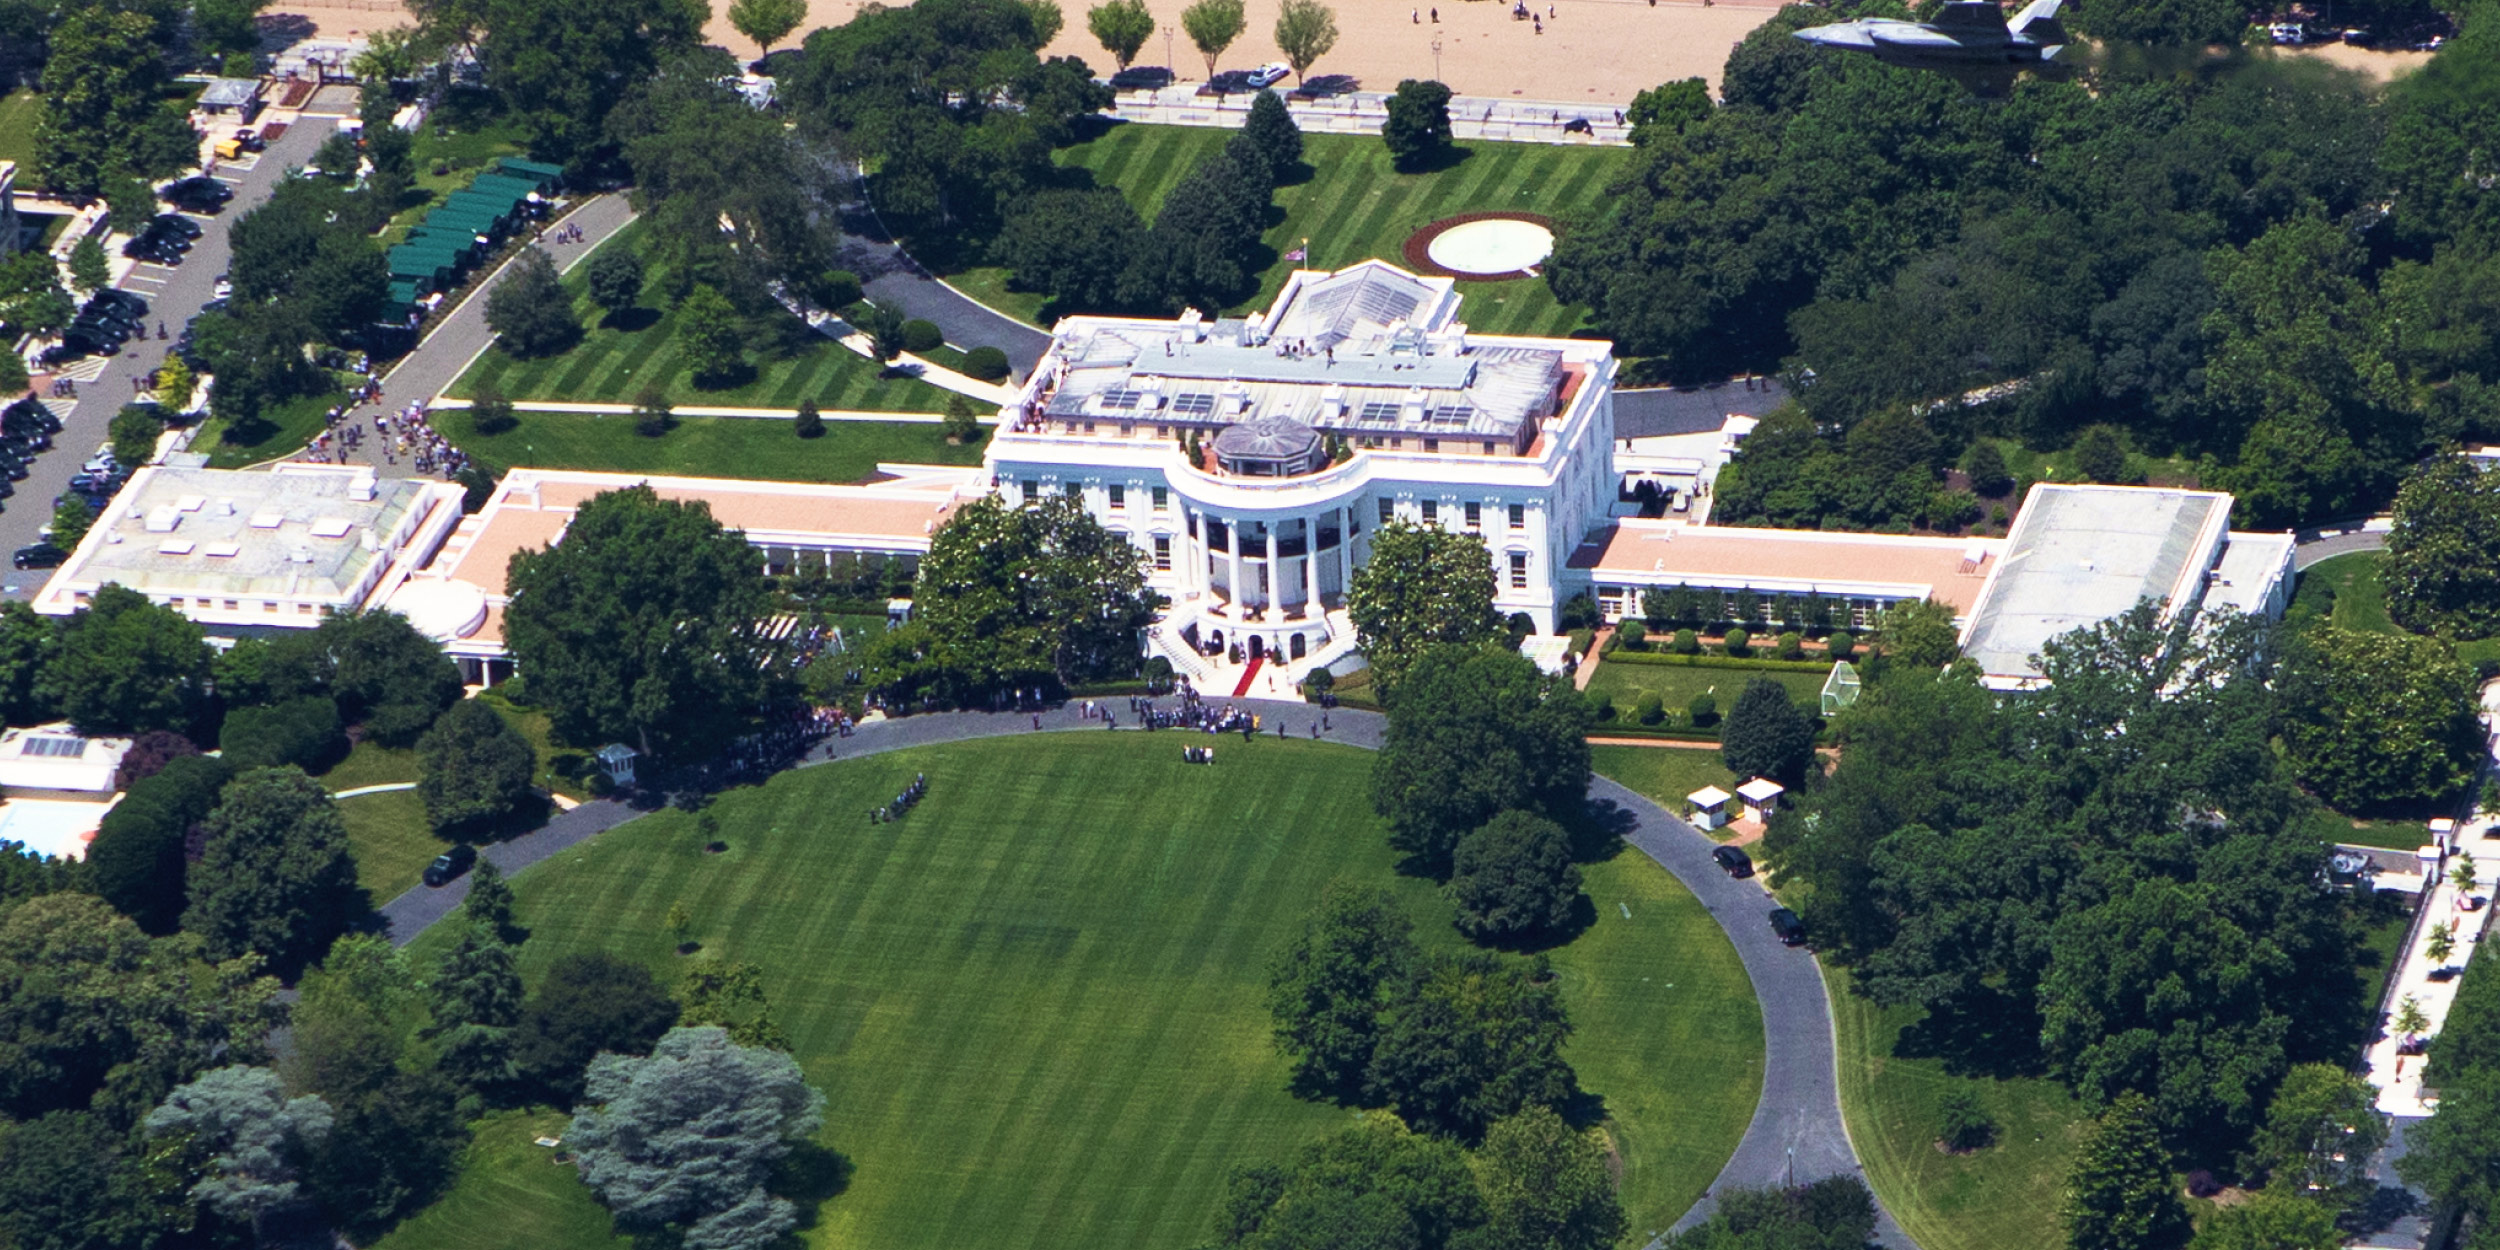 The White House Building